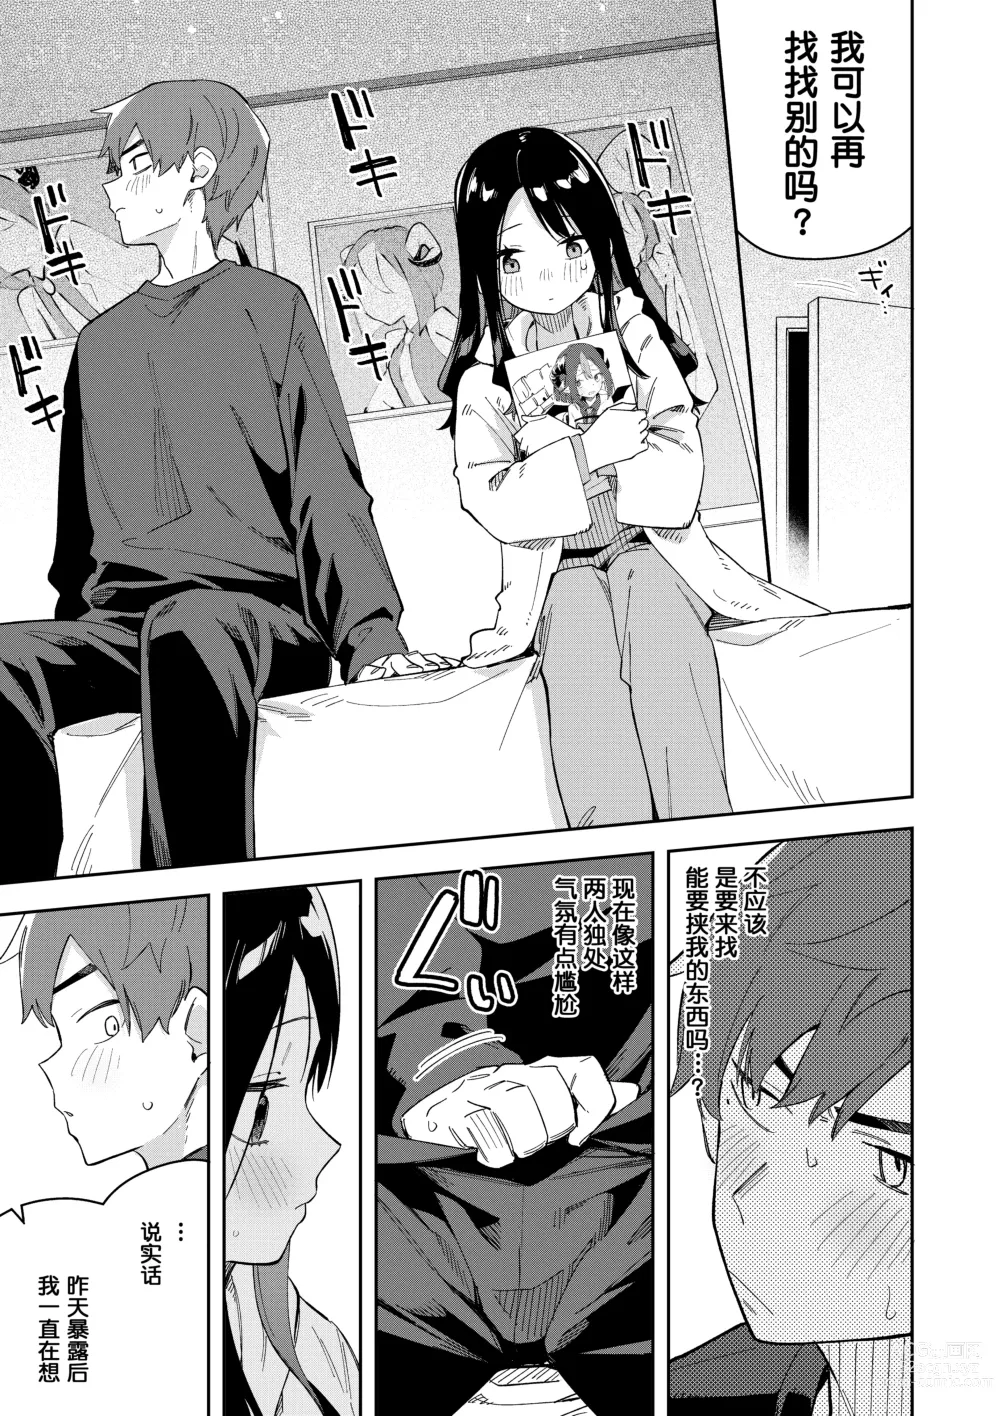 Page 19 of doujinshi 隣人は有名配信者3人目